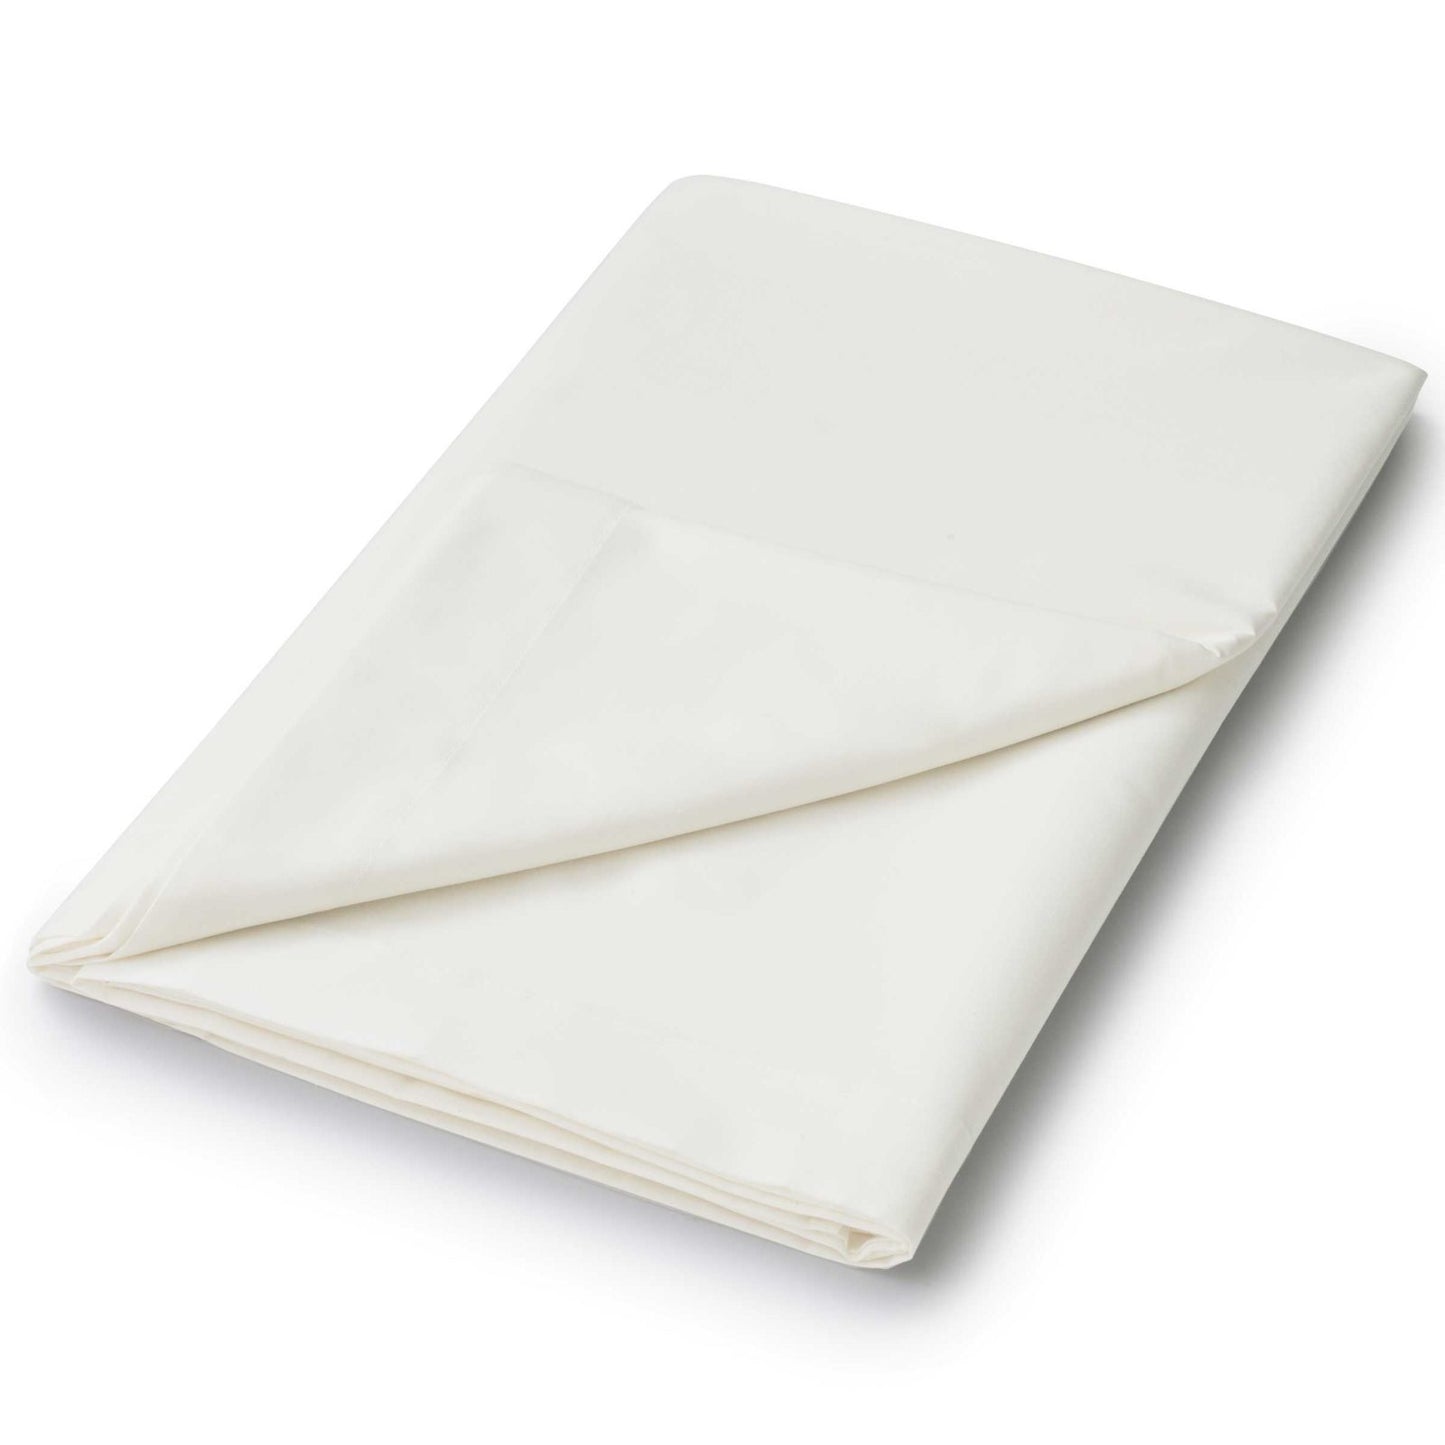 50/50 PLAIN DYE PERCALE DOUBLE FITTED SHEET - IVORY